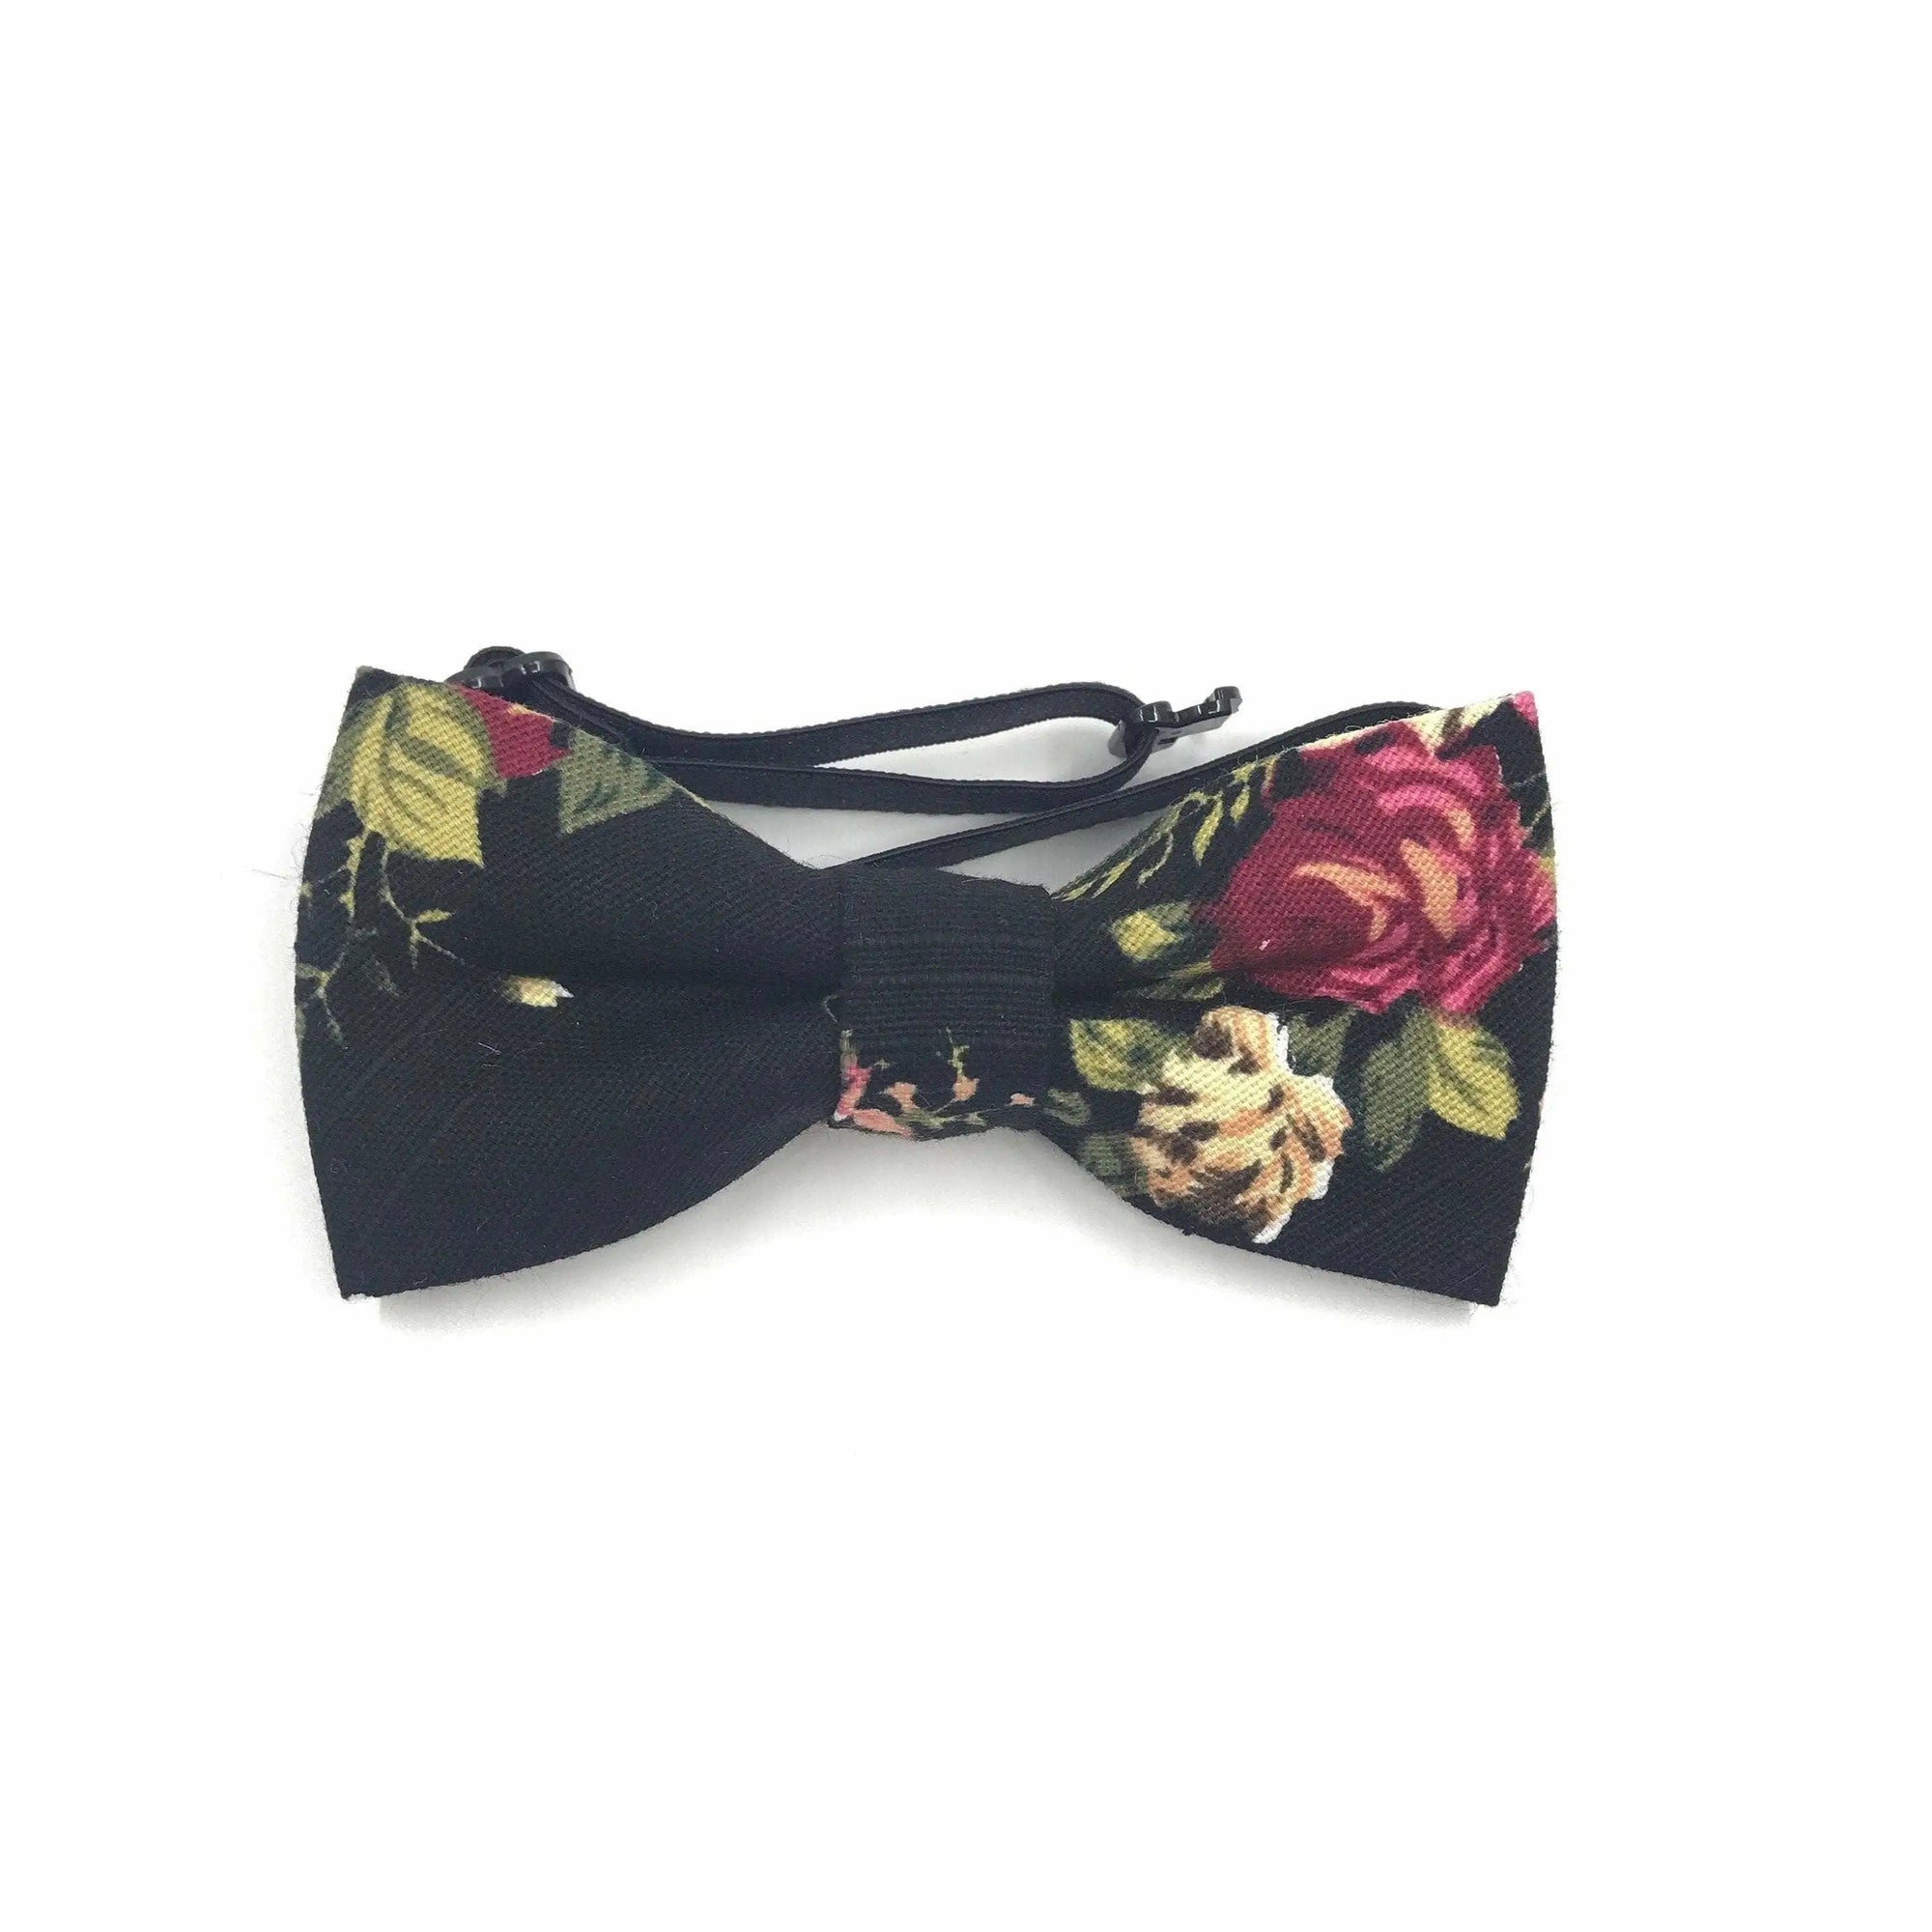 Black Floral Bow tie for kids JAKE / JAMES-Black Floral Bow tie for kids Strap is adjustablePre-Tied bowtieBow Tie 10.5 * 6CMLinen Add a touch of dapper to your little one&#39;s outfit with this JAKE Kids Floral Pre-Tied Bow Tie. This bow tie is made with high-quality fabric and construction so it&#39;ll look great wash after wash. The black floral print is perfect for any special occasions, whether it&#39;s a wedding or family gathering. Plus, the pre-tied design makes it easy to put on and take off. Great